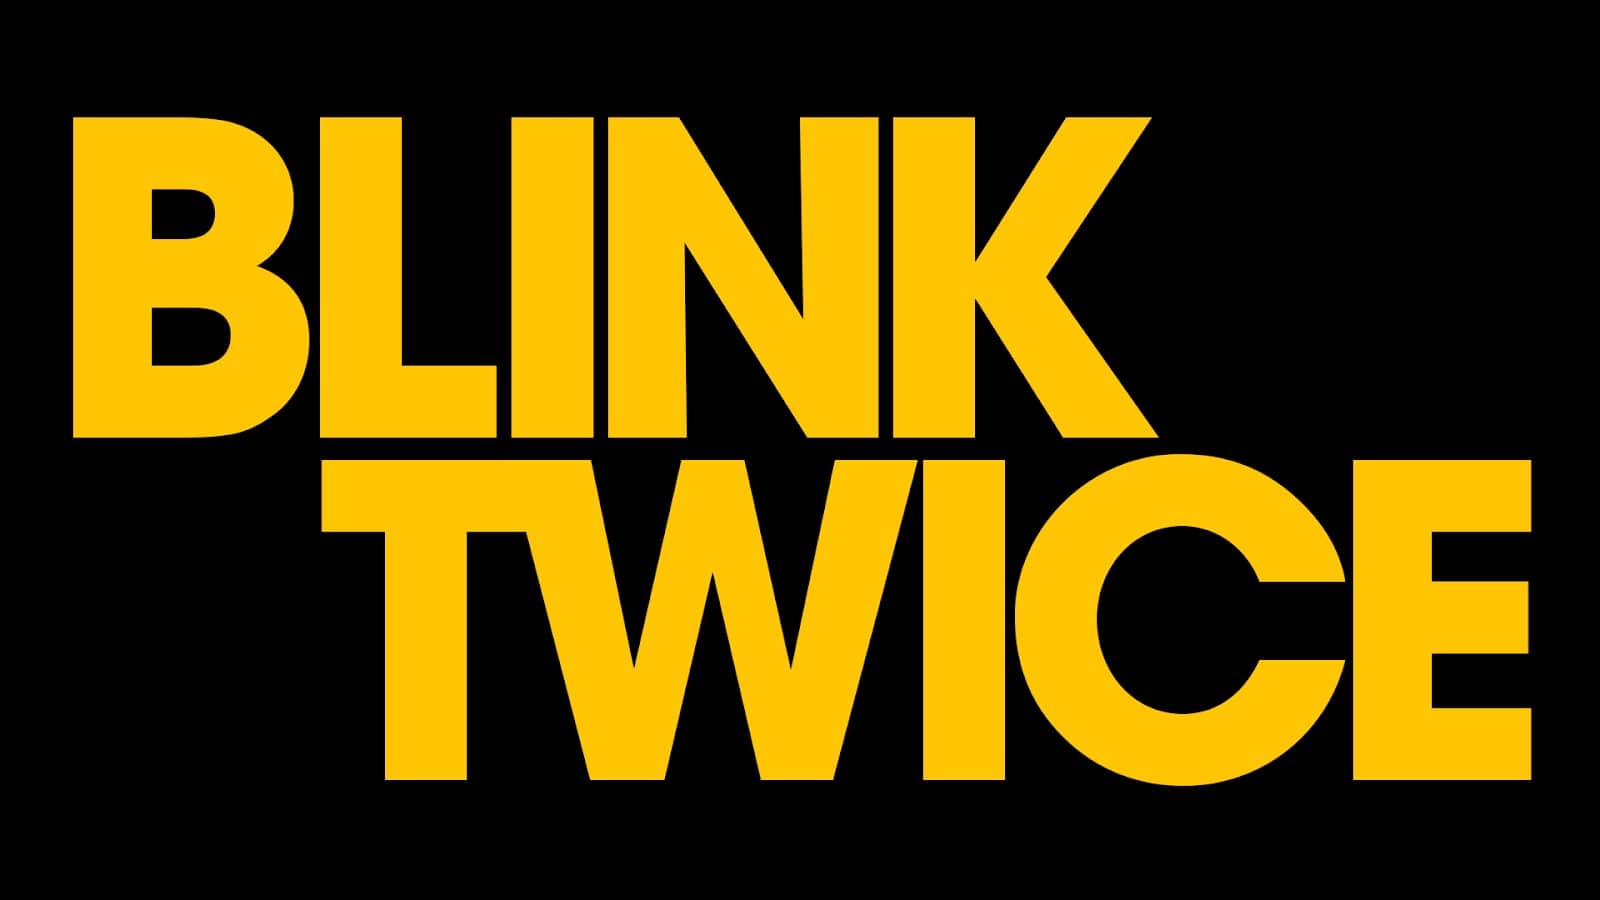 You are currently viewing Watch Trailer for Zoë Kravitz’s BLINK TWICE starring Naomi Ackie & Channing Tatum here